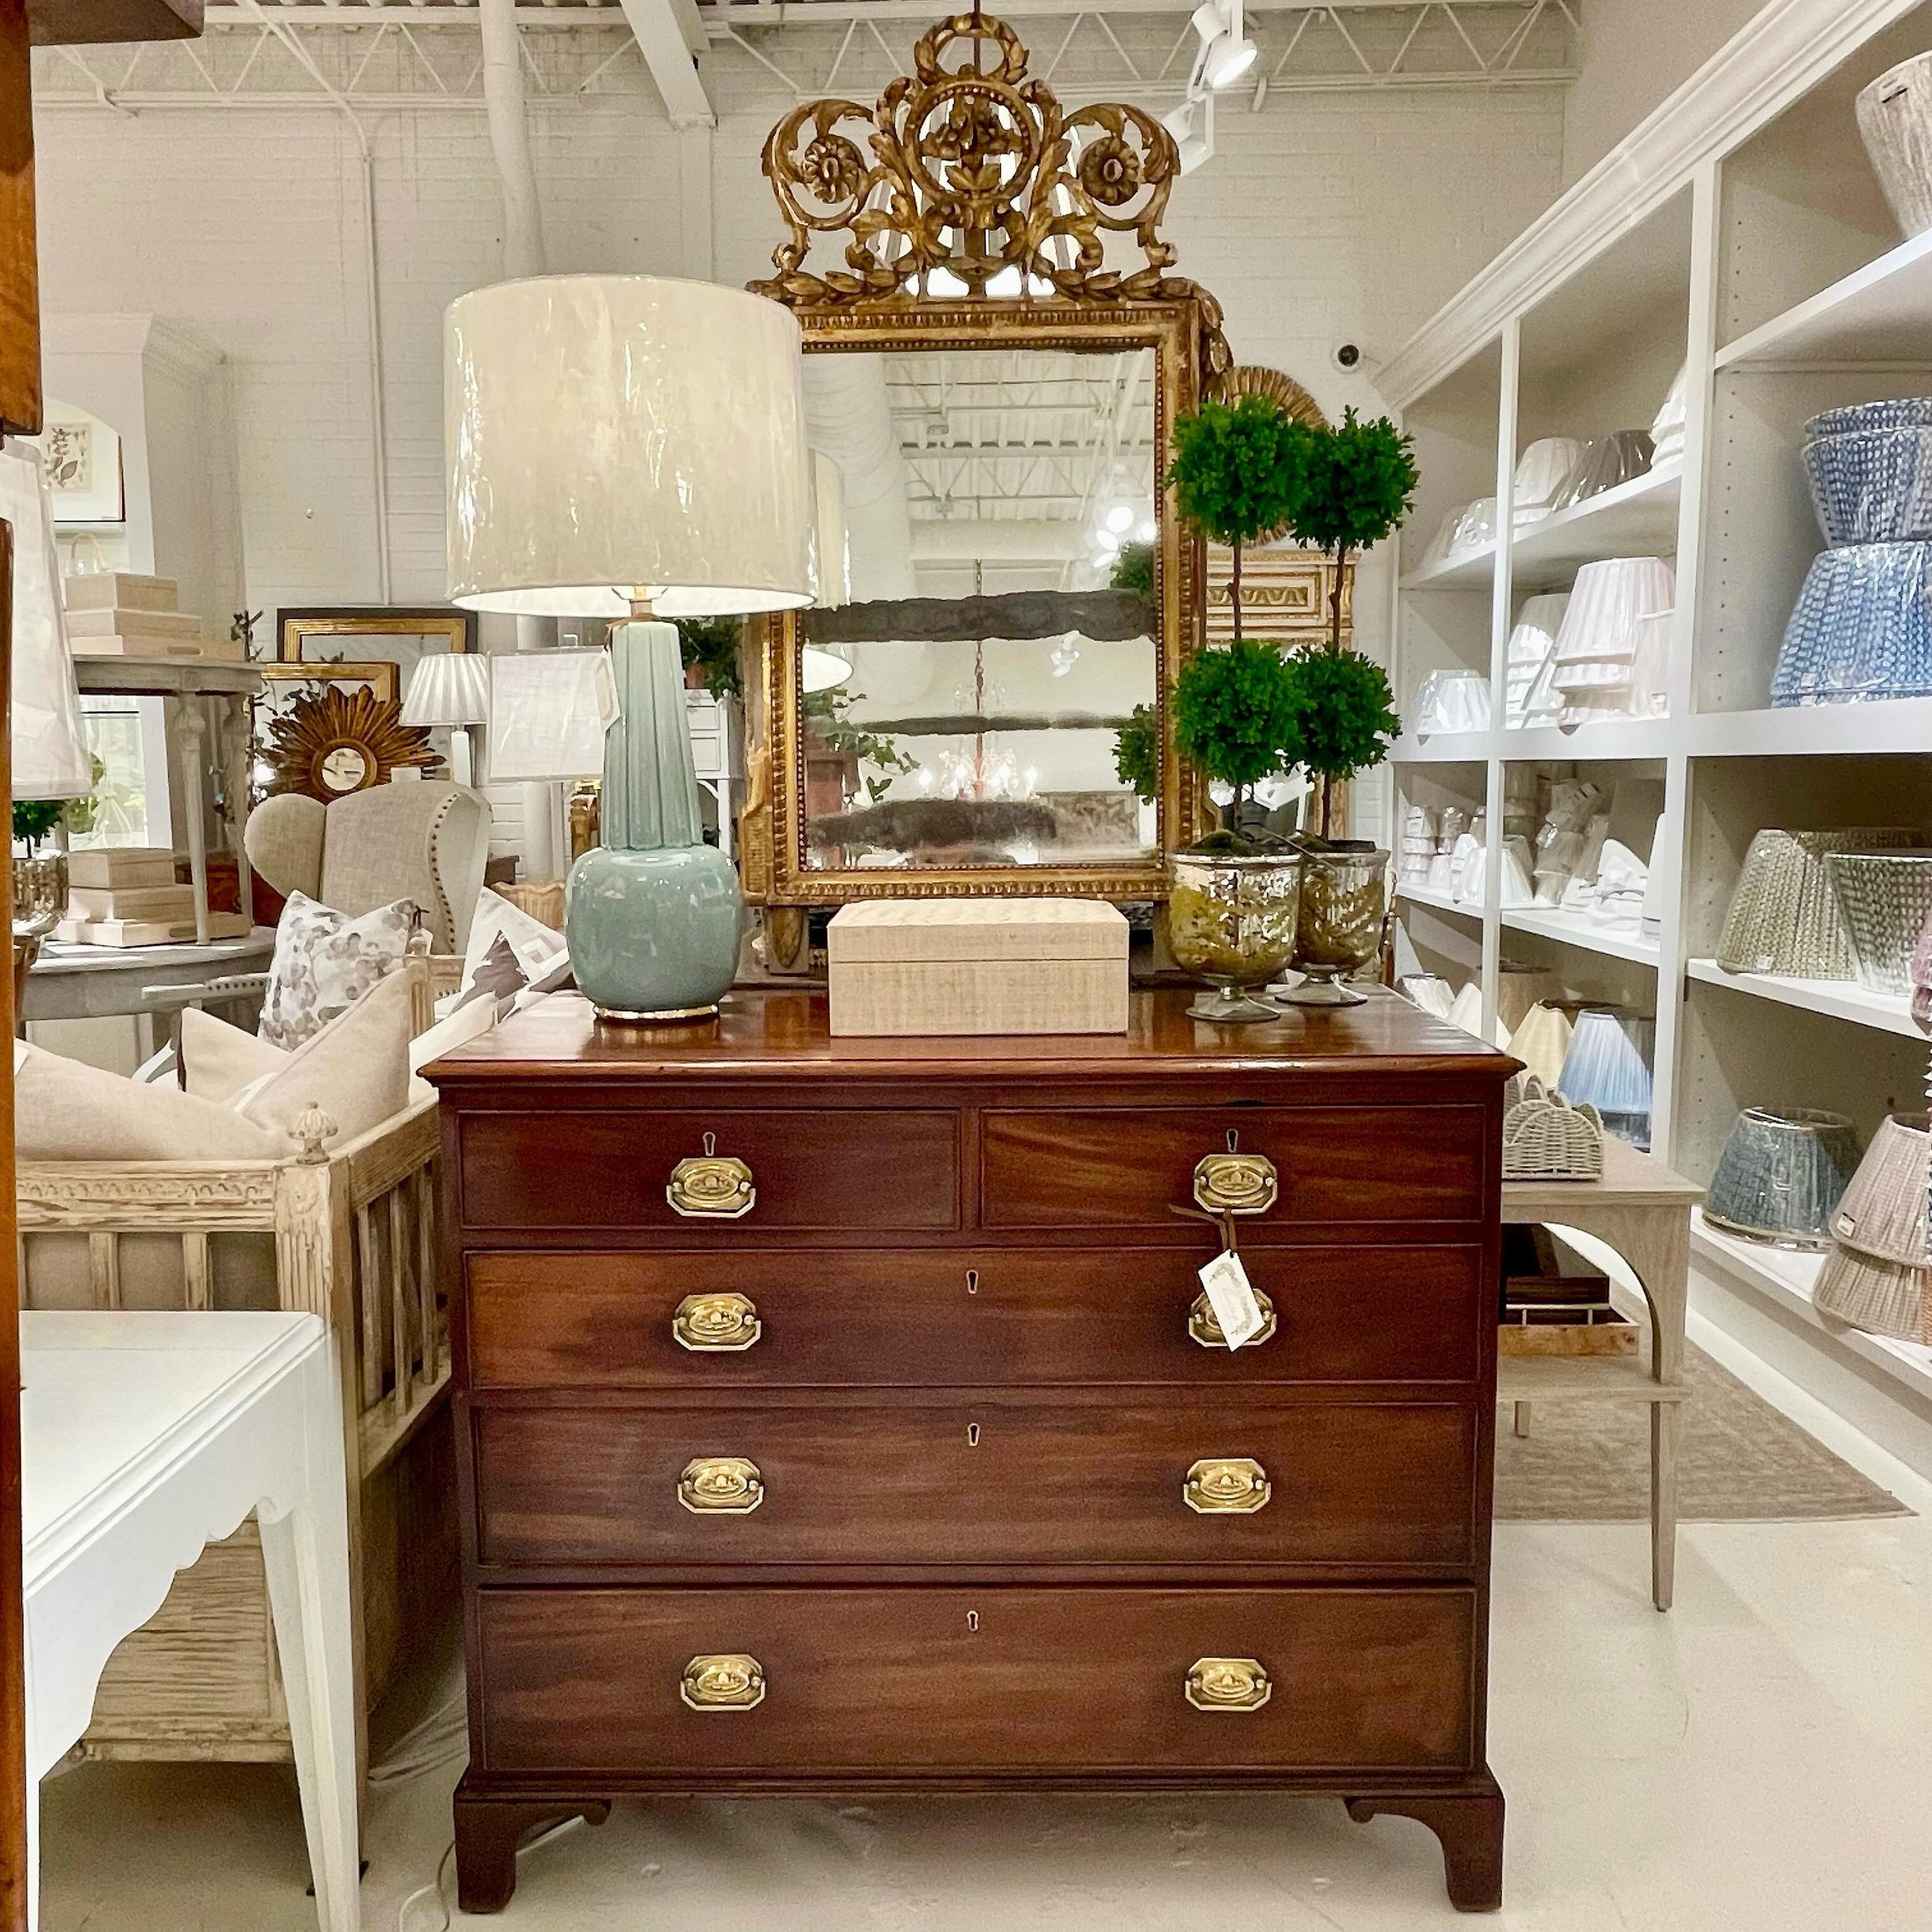 Happy Sunday. New shoppe vignette featuring an antique English mahogany 2-over-3 chest with beautiful brass hardware and an intricately hand carved antique French gilt wood mirror. Loving the mix! #heritageclt #curateddecor #europeanantiques #italian